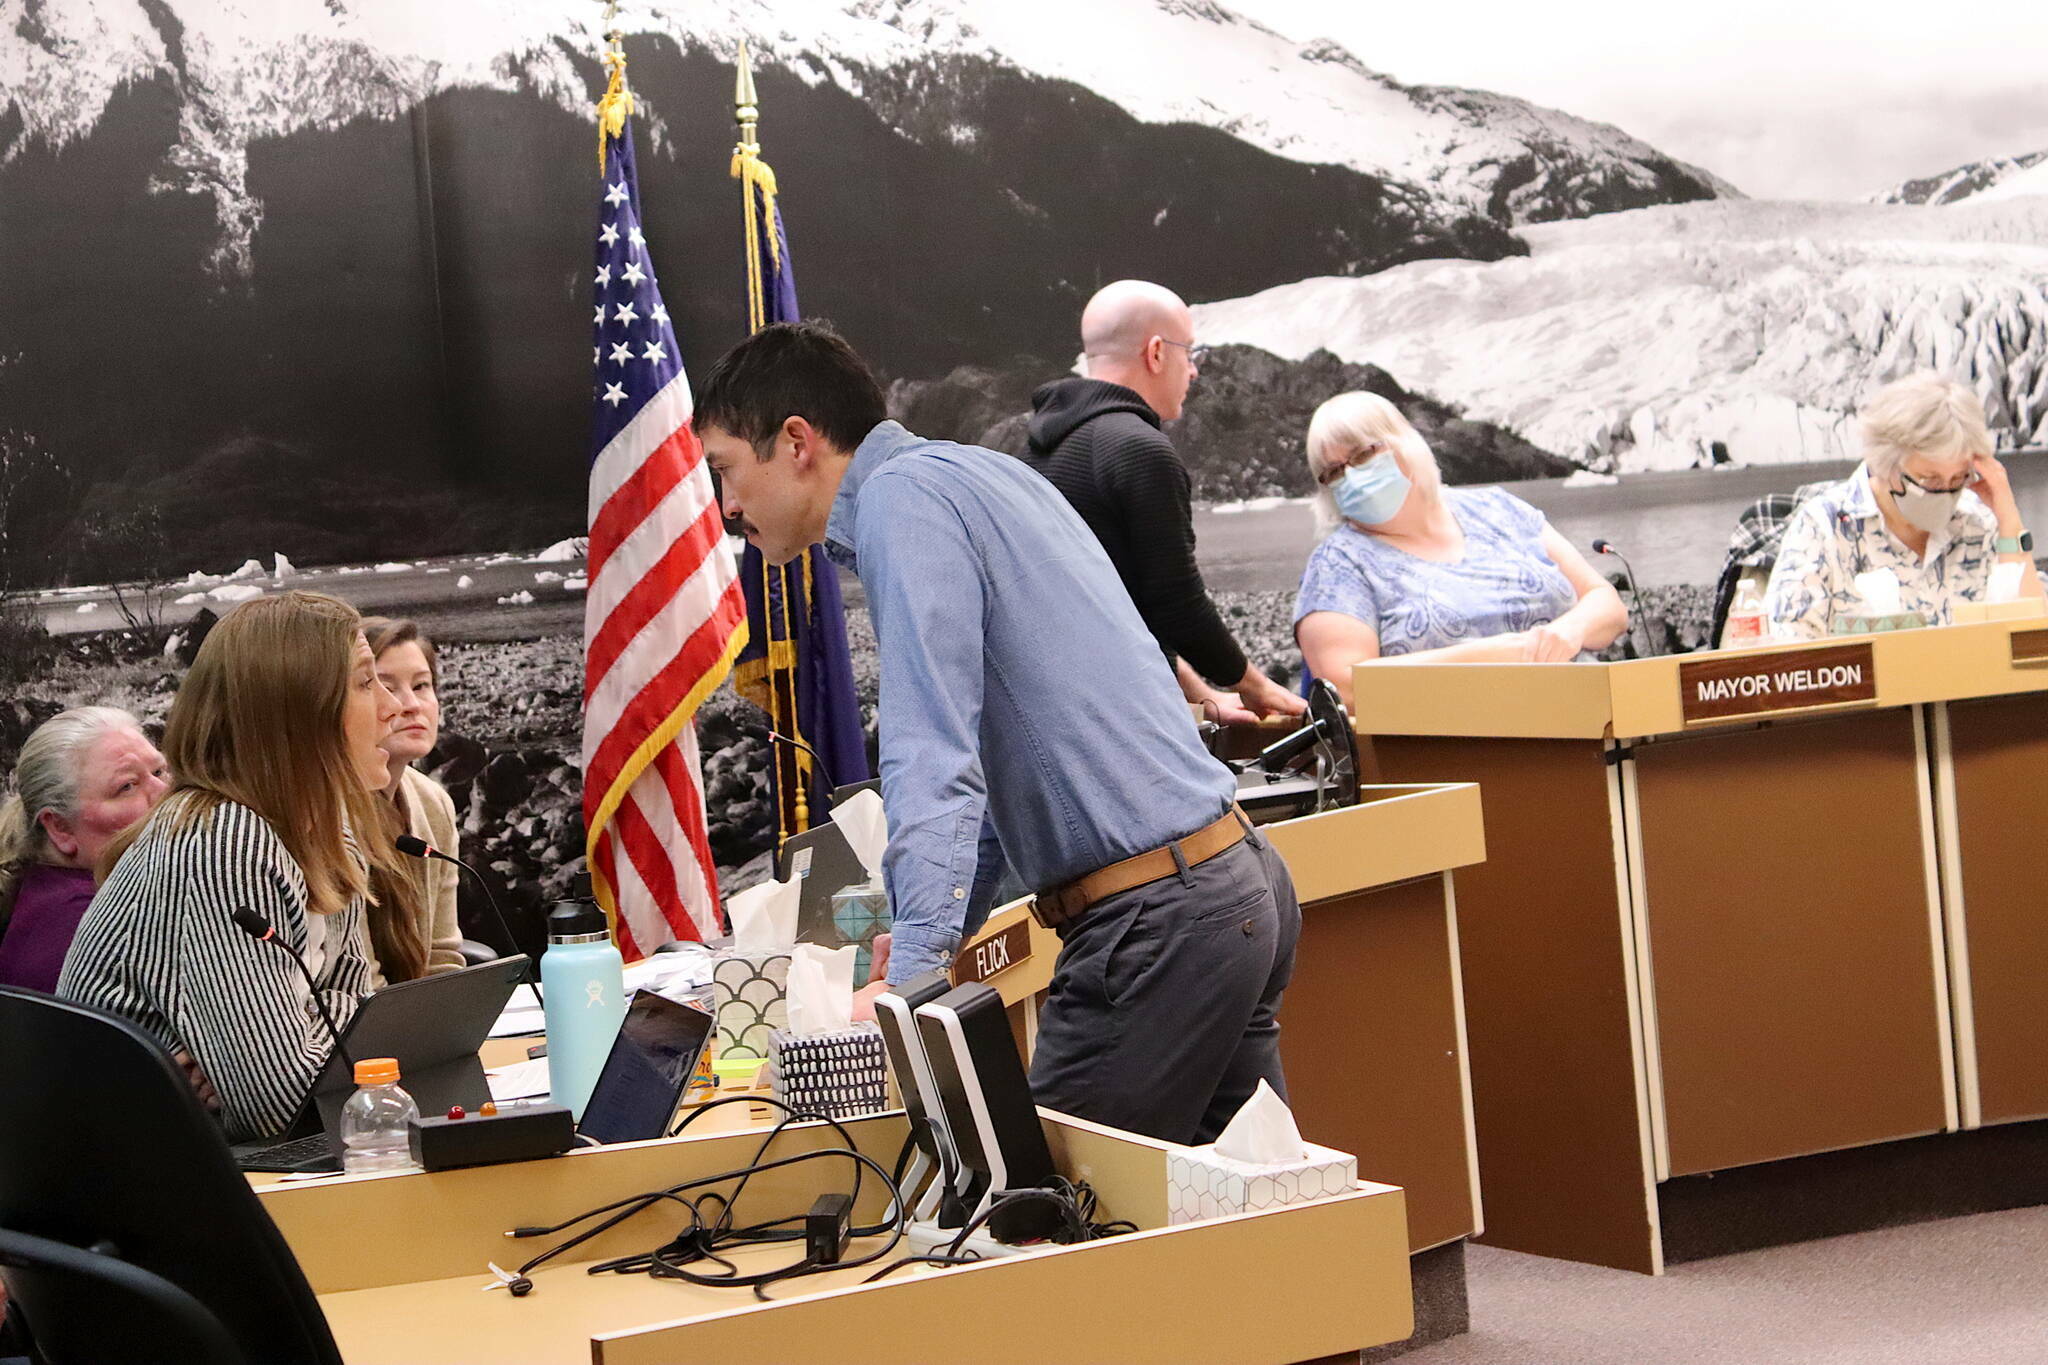 Juneau Assembly members and city administrators meet to discuss budget matters involving the Juneau School District on Feb. 7. (Mark Sabbatini / Juneau Empire file photo)